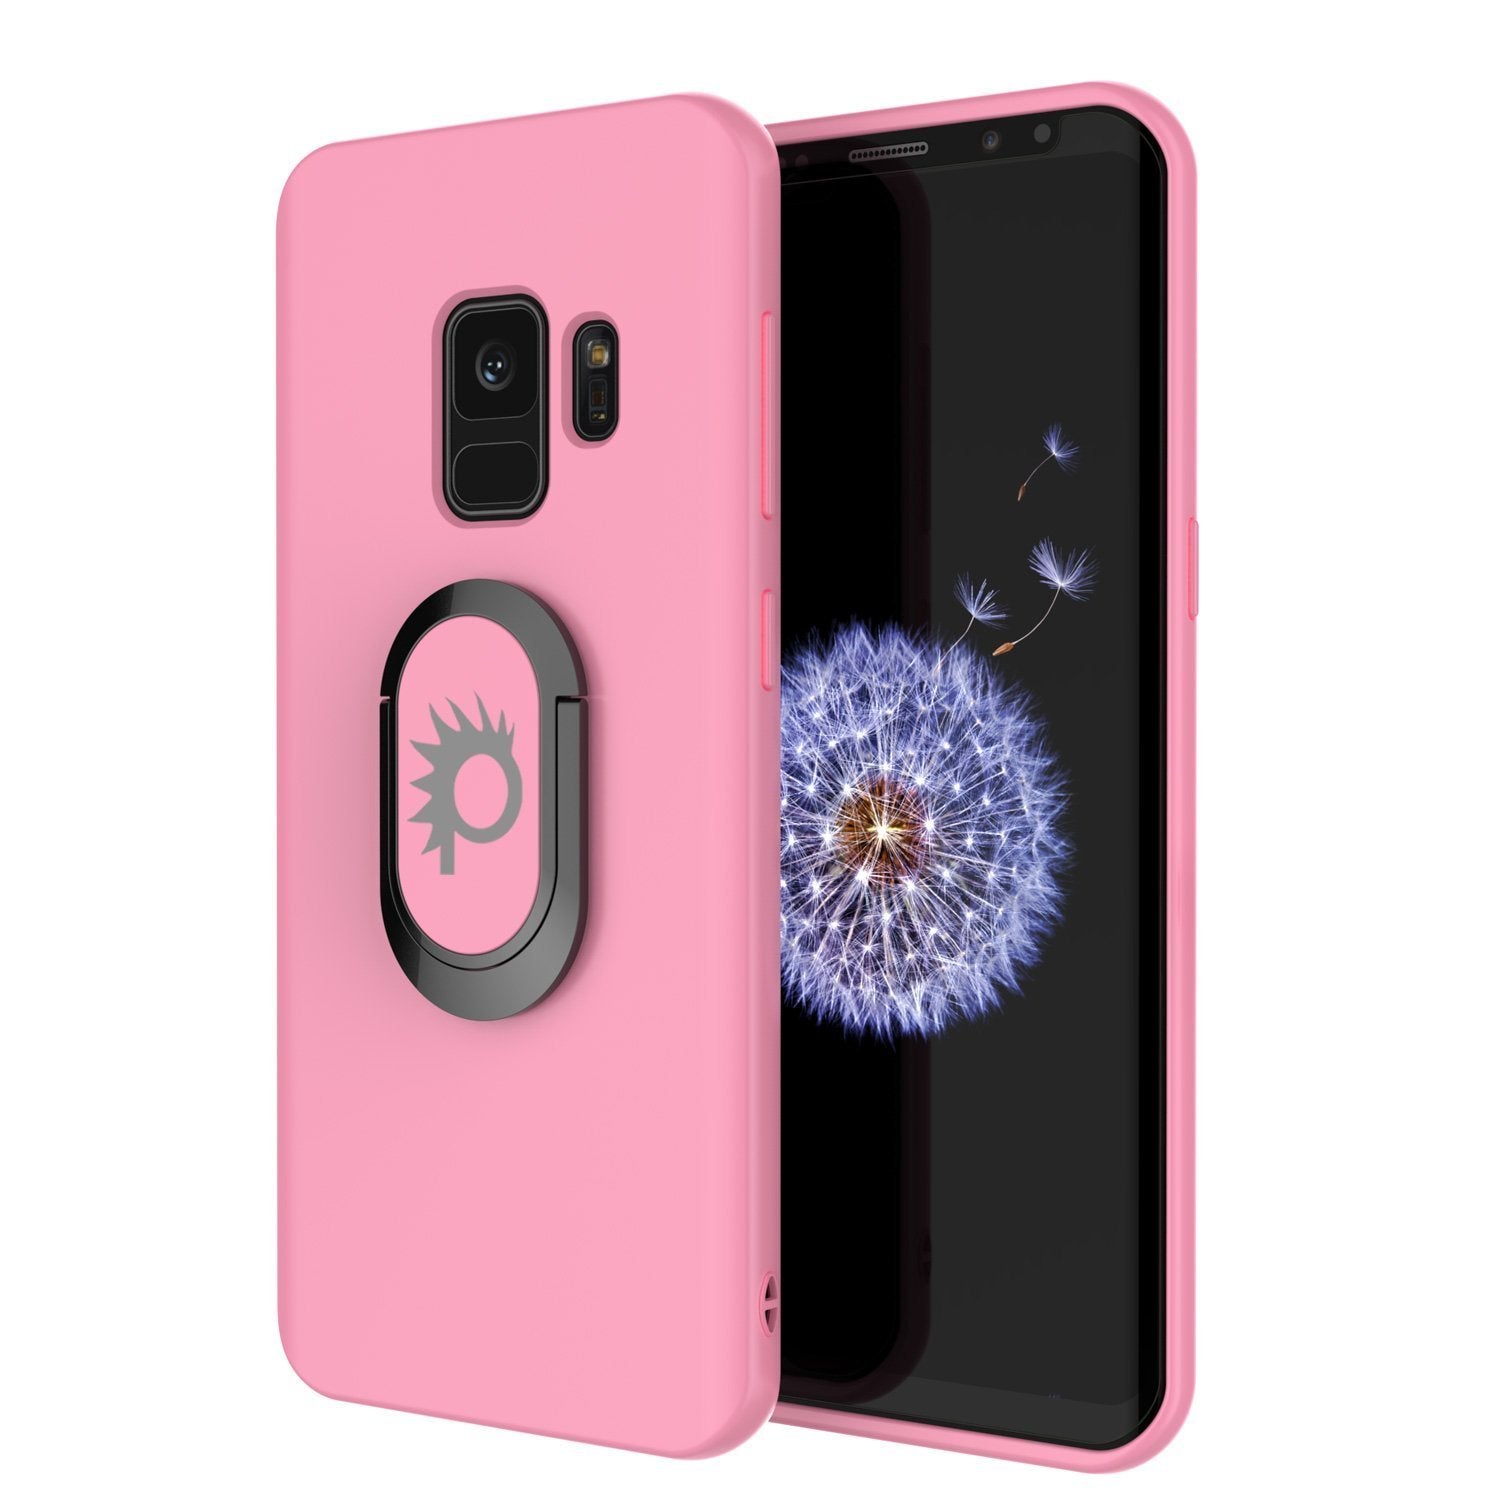 Galaxy S9 Case, Punkcase Magnetix Protective TPU Cover W/ Kickstand, Ring Grip Holder & Metal Plate for Magnetic Car Phone Mount PLUS PunkShield Screen Protector for Samsung S9 Edge [Pink] - PunkCase NZ